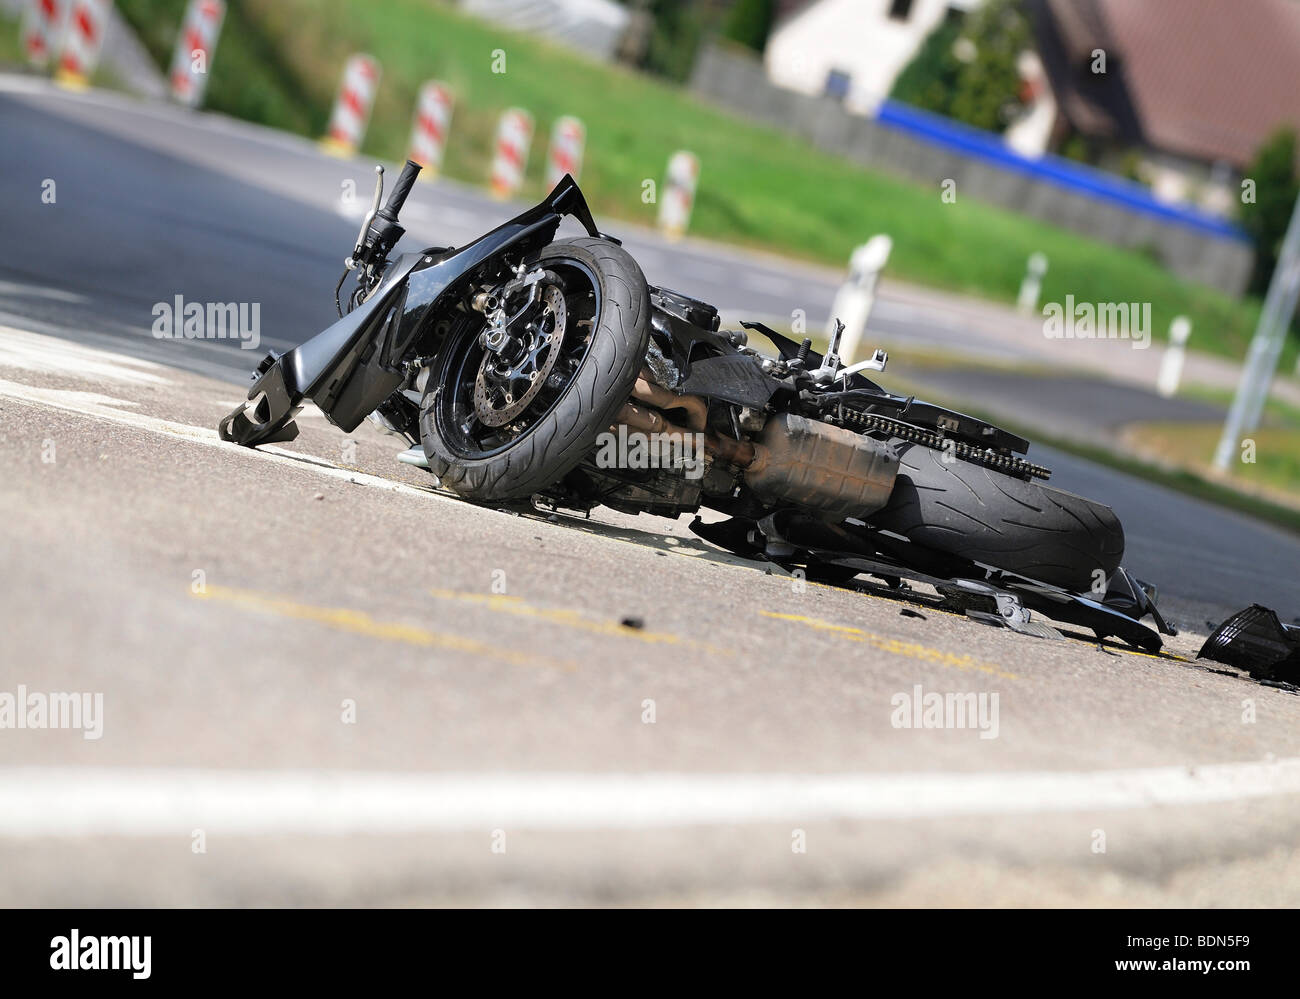 Fatal traffic accident, motorcycle, crossing the street K 1013 between Flacht and Perouse, Rutesheim, Baden-Wuerttemberg, Germa Stock Photo